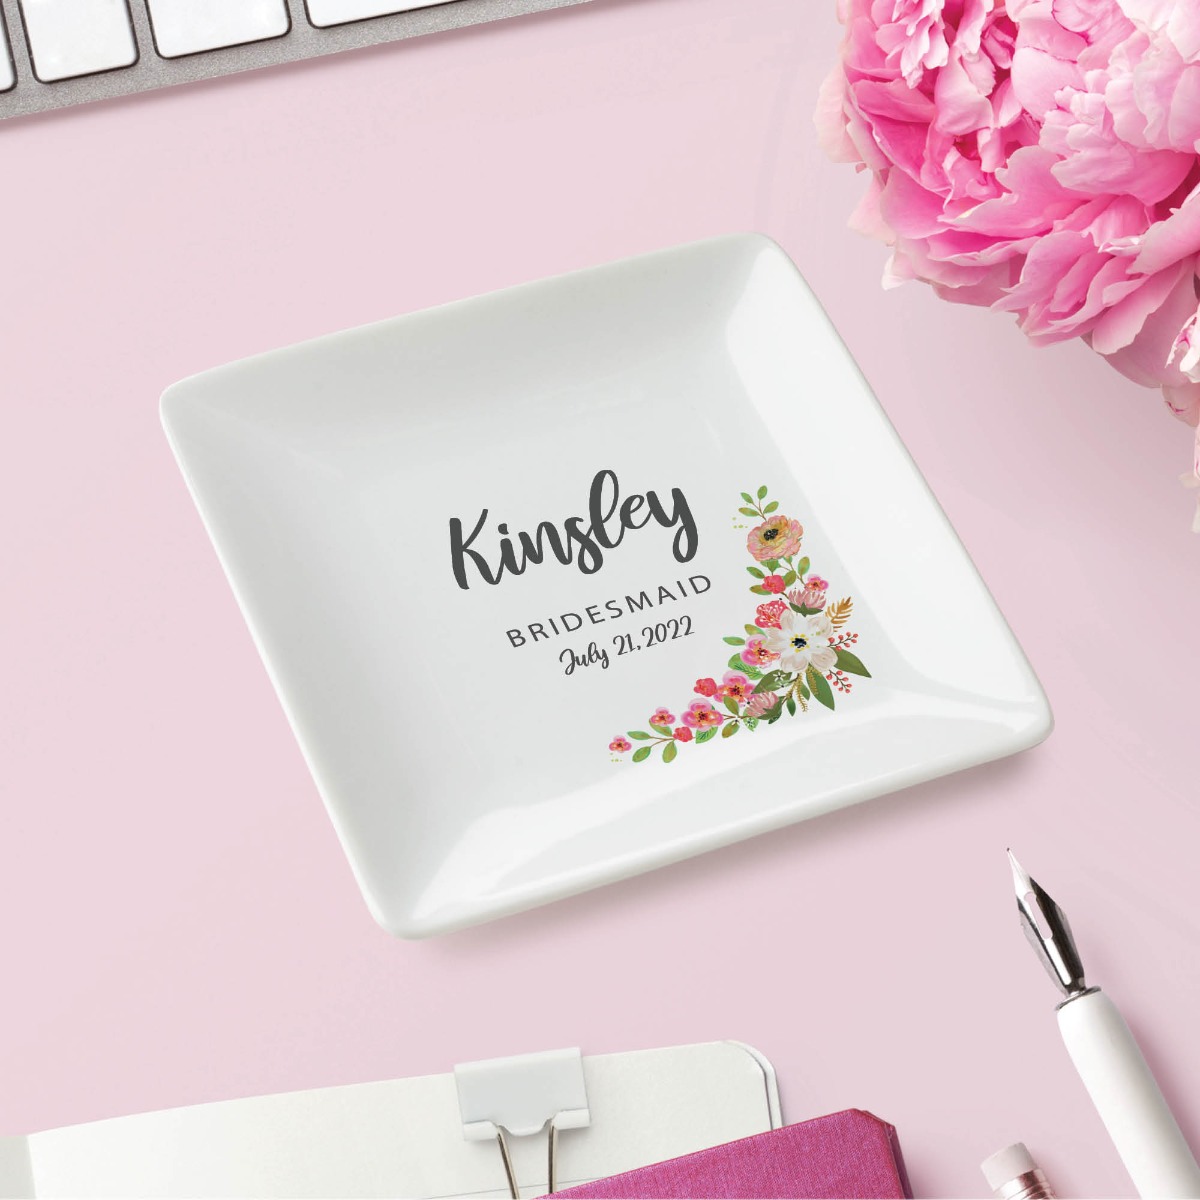 Wedding floral trinket tray with personalization 